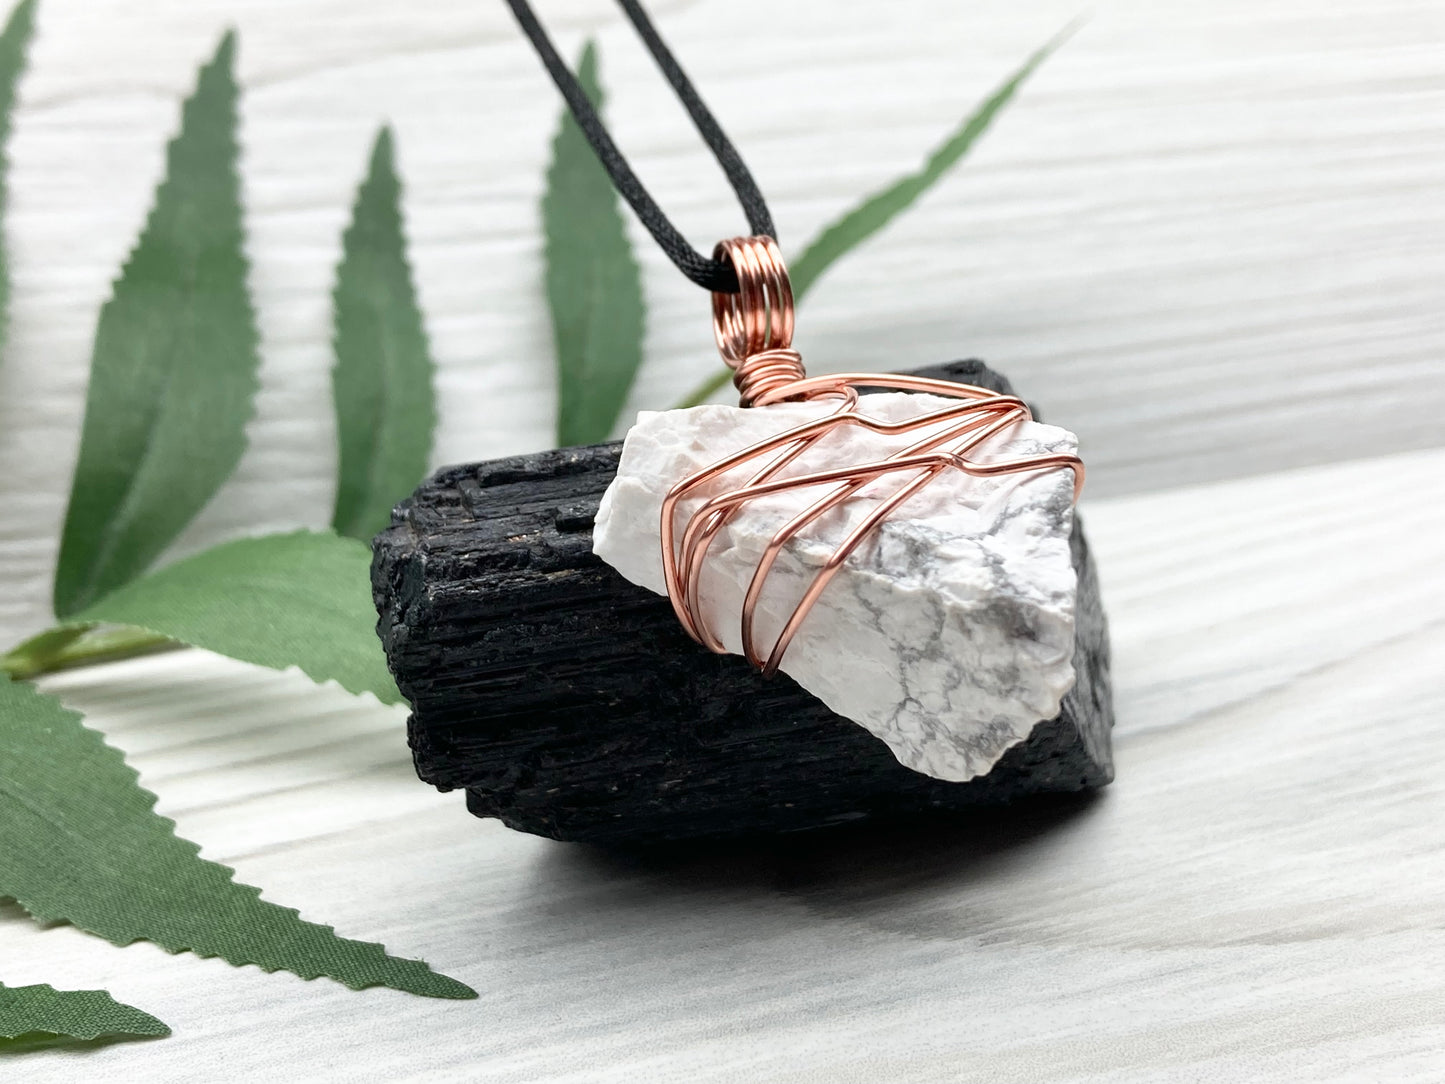 Raw Howlite Necklace. Raw White Crystal With Gray Marble Wrapped With Pure Copper Wire. Comes On A Black Chain. Metaphysical Jewelry For Him or Her. Gemini Zodiac Gift.